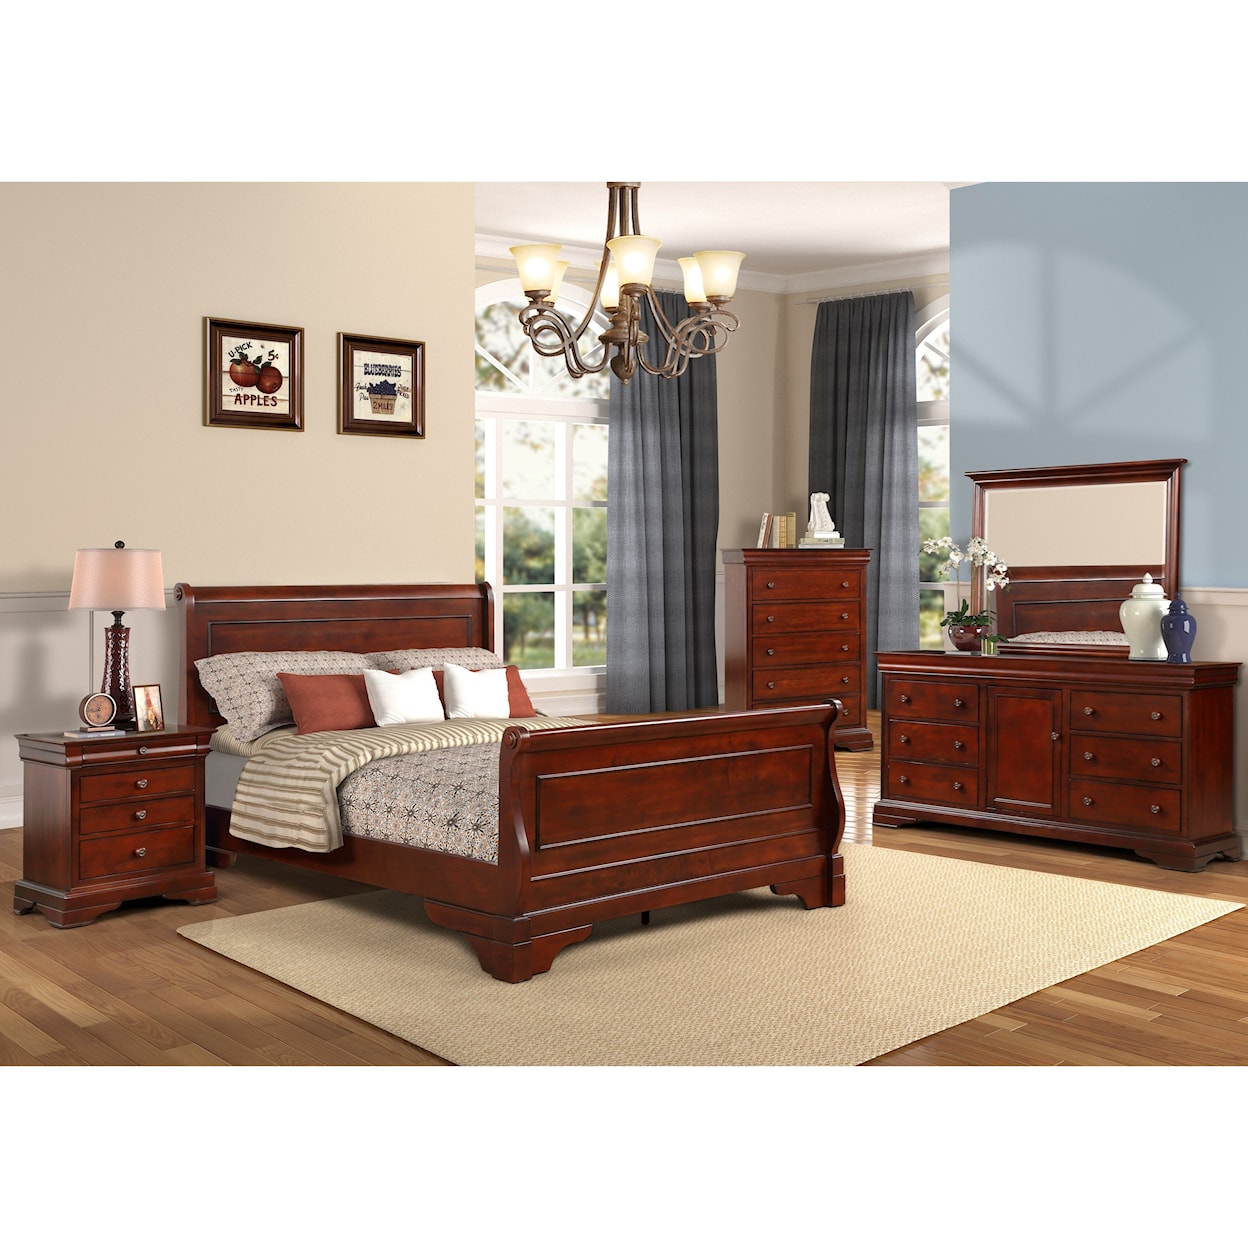 New Classic Furniture Versaille King Bedroom Group